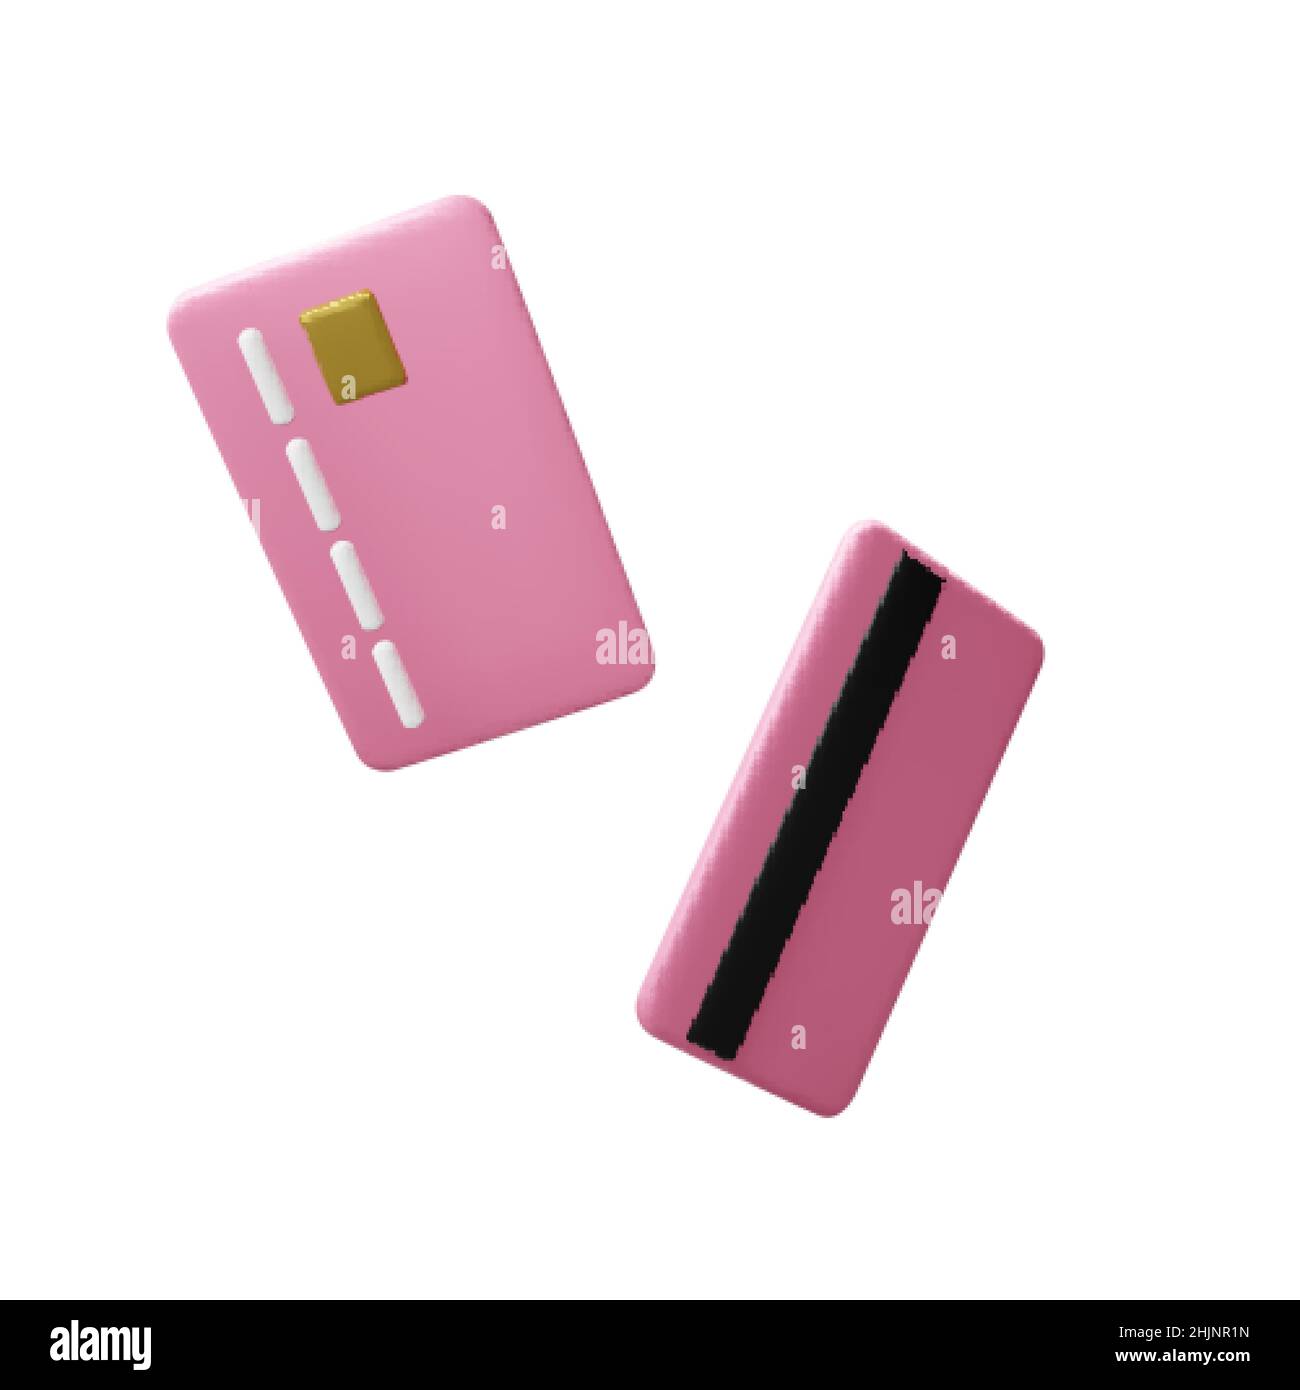 Cartoon style pink flying credit card front and back view. Banking operation. Financial transactions and payments. Credit card for online payment or s Stock Vector